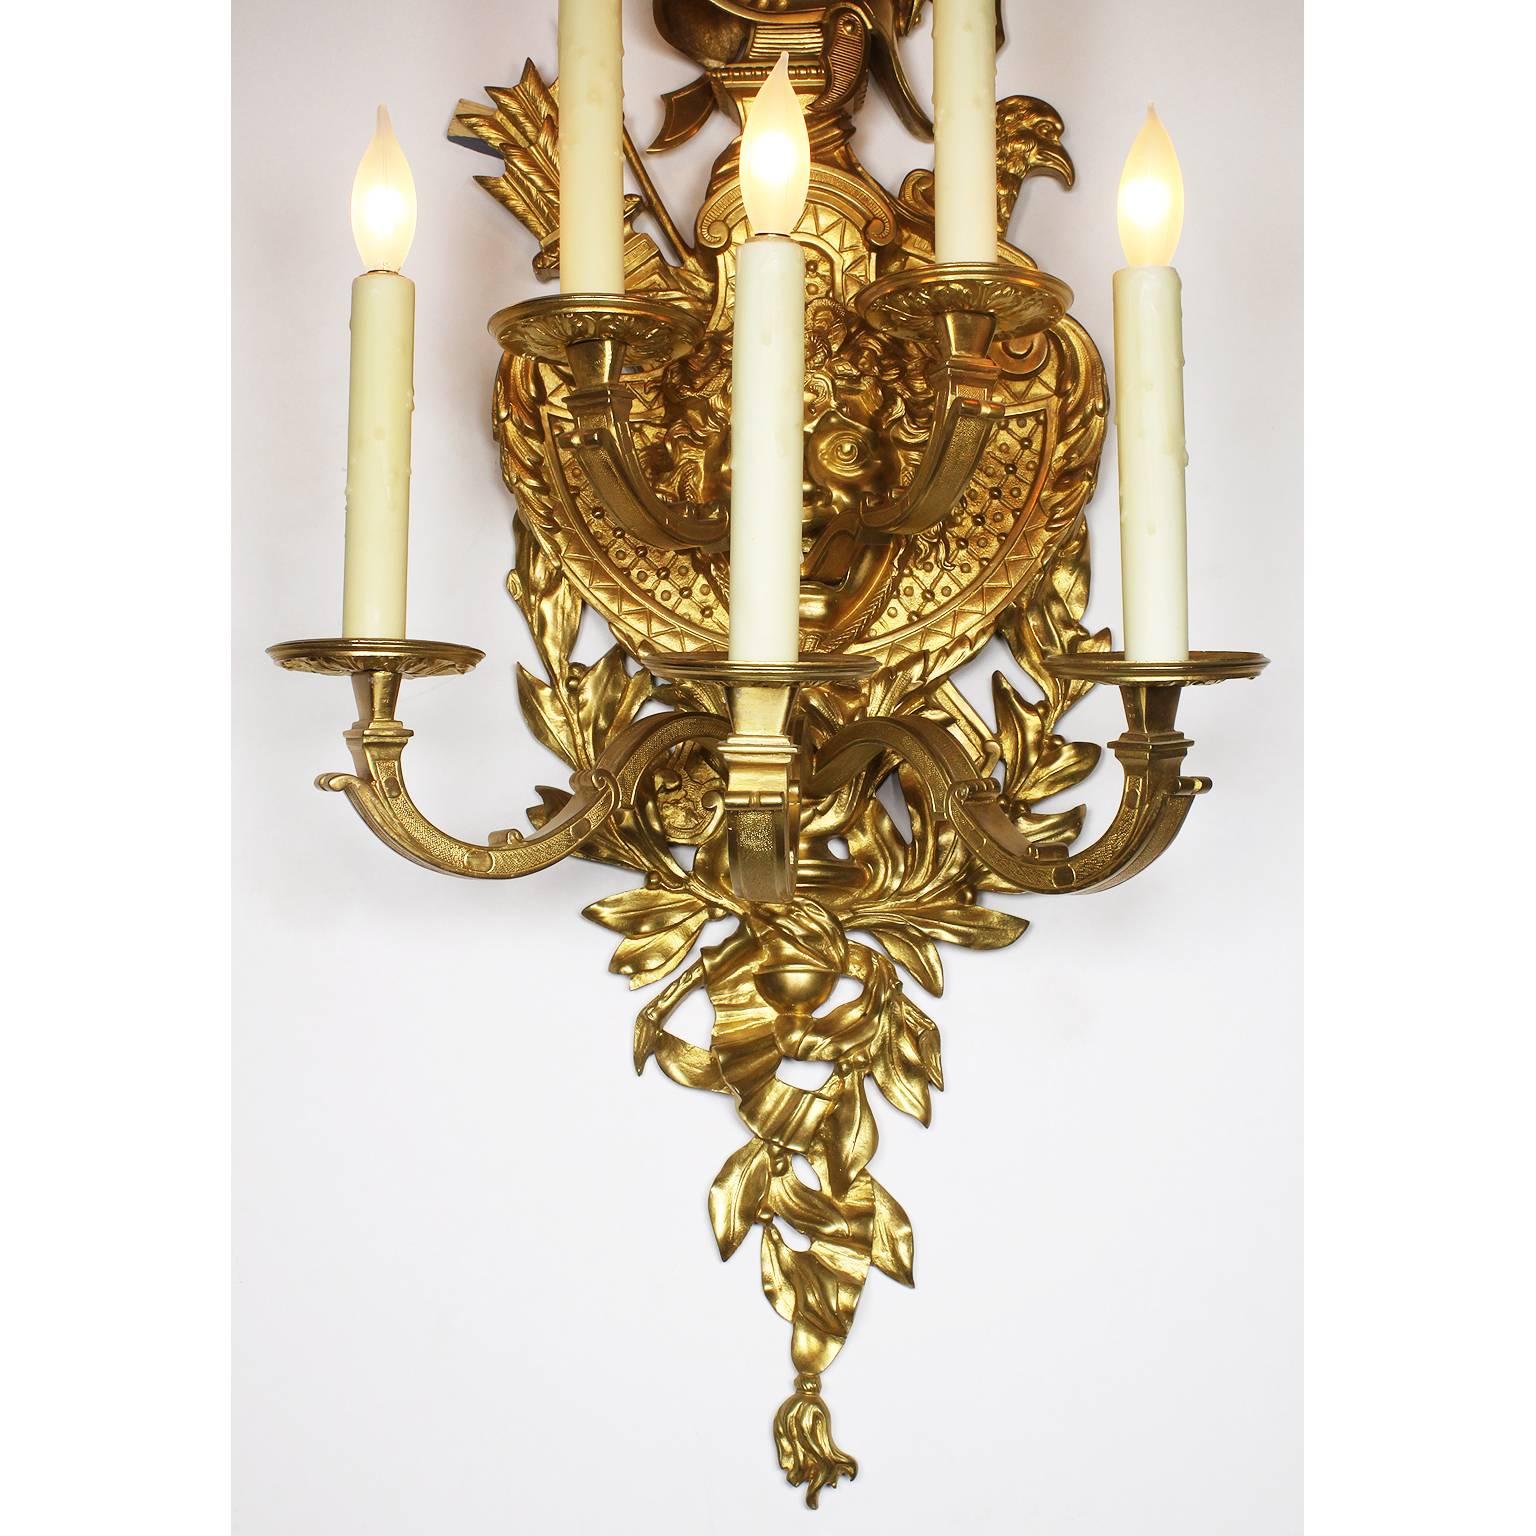 Early 20th Century Pair of French 19th-20th Century Regency Style Gilt-Bronze Sconces after Feuchèr For Sale